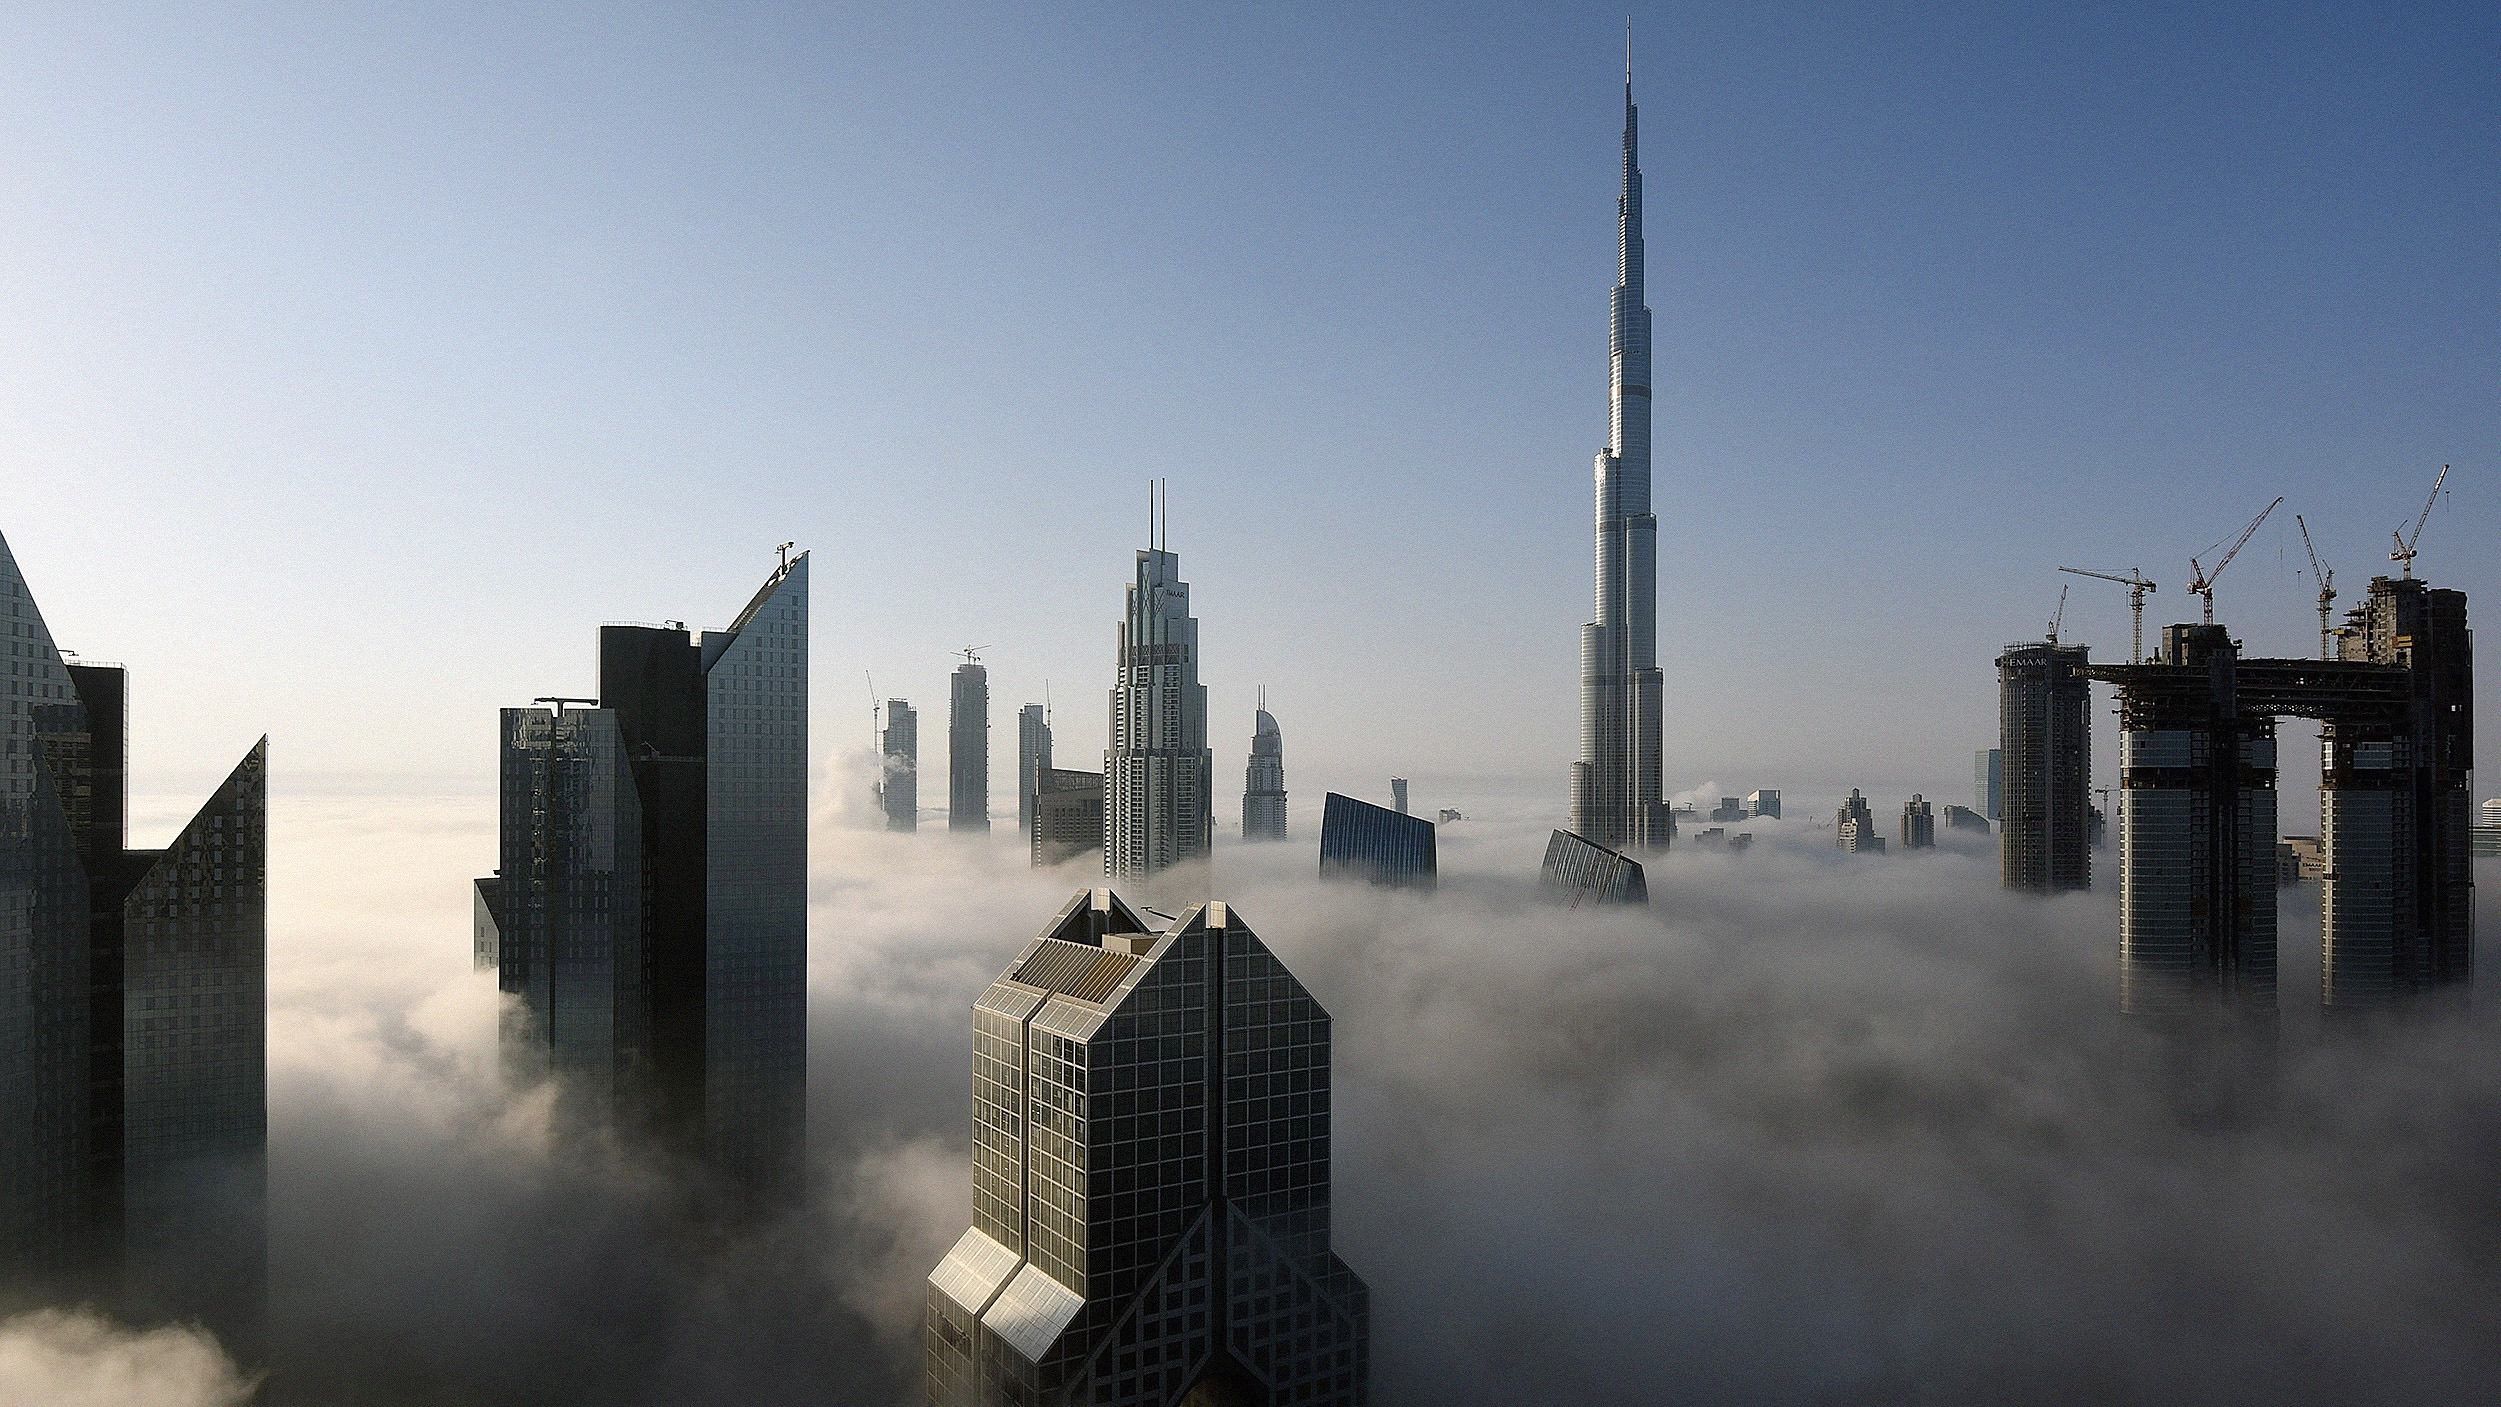 Skyline of a city with tall skyscrapers emerging above a thick layer of fog on a clear day, including one exceptionally tall building towering over the tallest buildings.